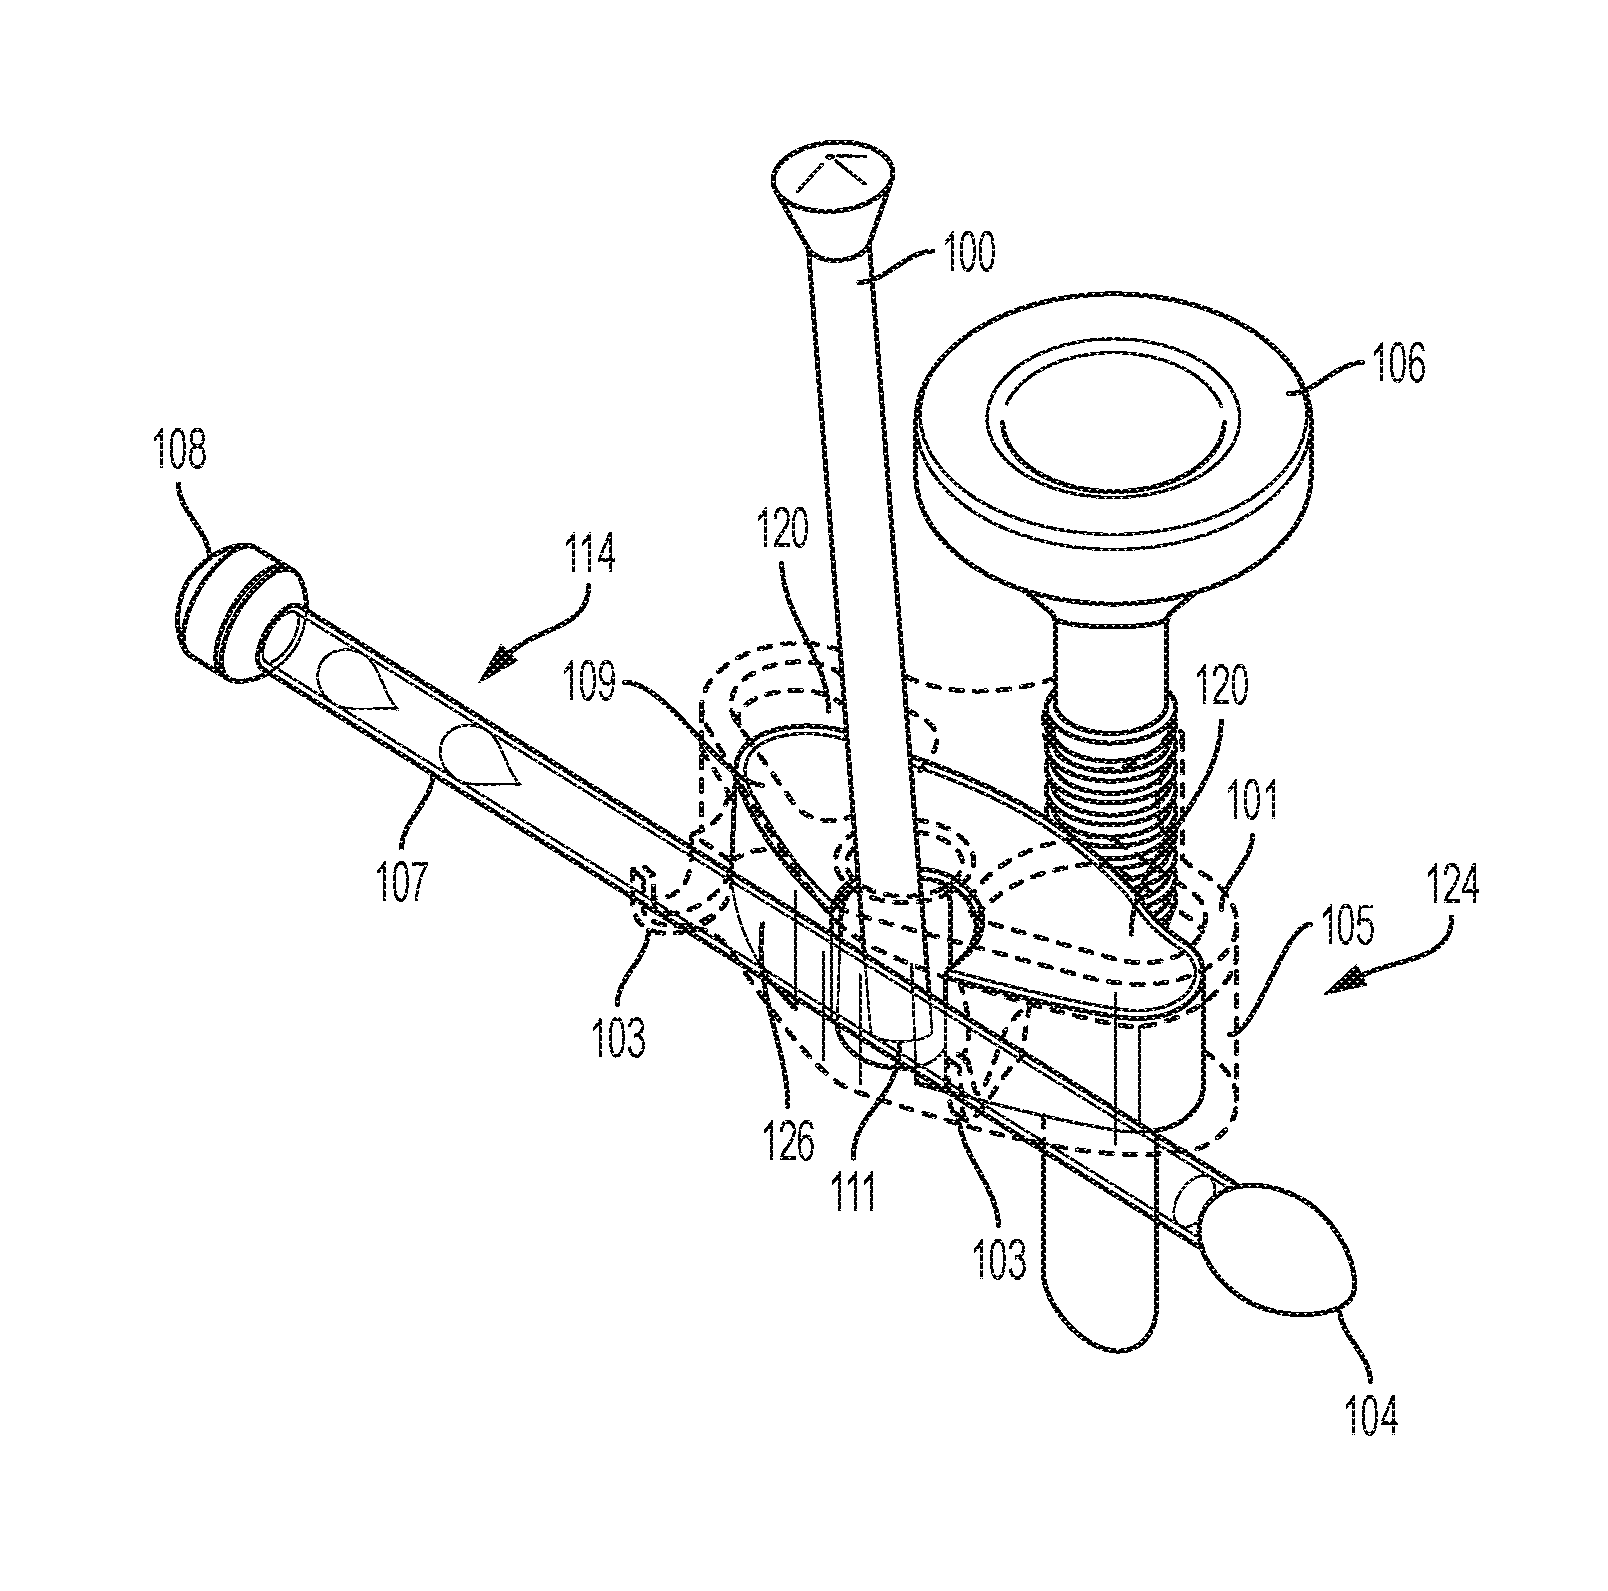 Cleaning Device for Cleaning a Scope, Laparoscope or Microscope Used in Surgery or Other Medical Procedures and a Method of Using the Device During Surgical or Other Medical Procedures